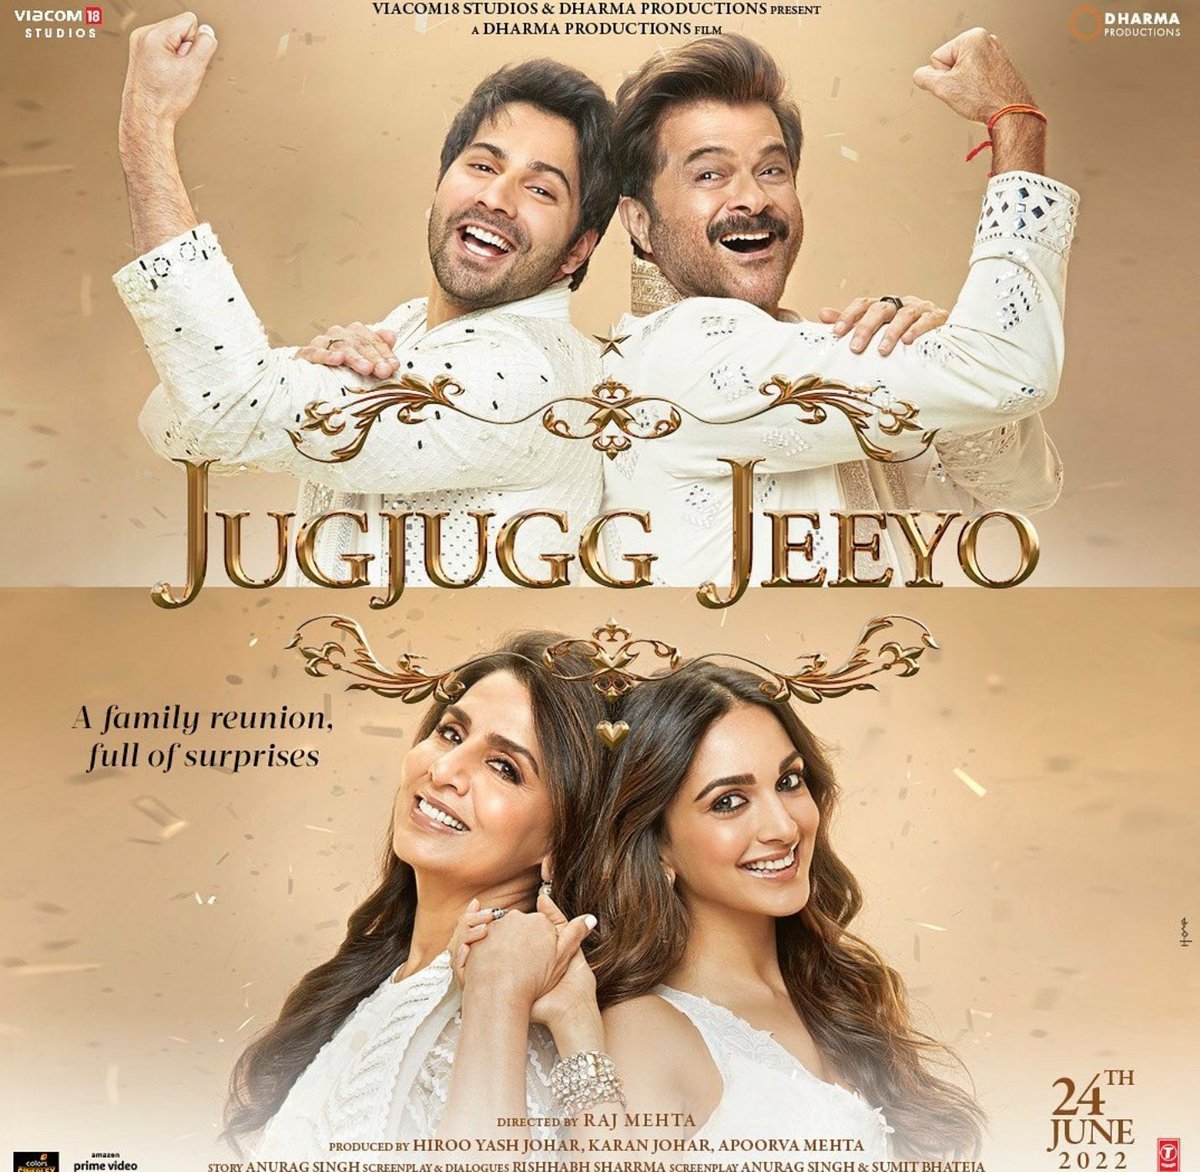 #JugJuggJeeyo - ⭐⭐⭐⭐🌠 4.5/5
Is A surprise Star
Perfectly made,example of Perfect Direction
Every moment comes with joy and fun
Starcast is mesmerizing ,another Shocker after #BhoolBhulaiya2 
#VarunDhawan #AnilKapoor #KiaraAdvani #NeetuKapoor